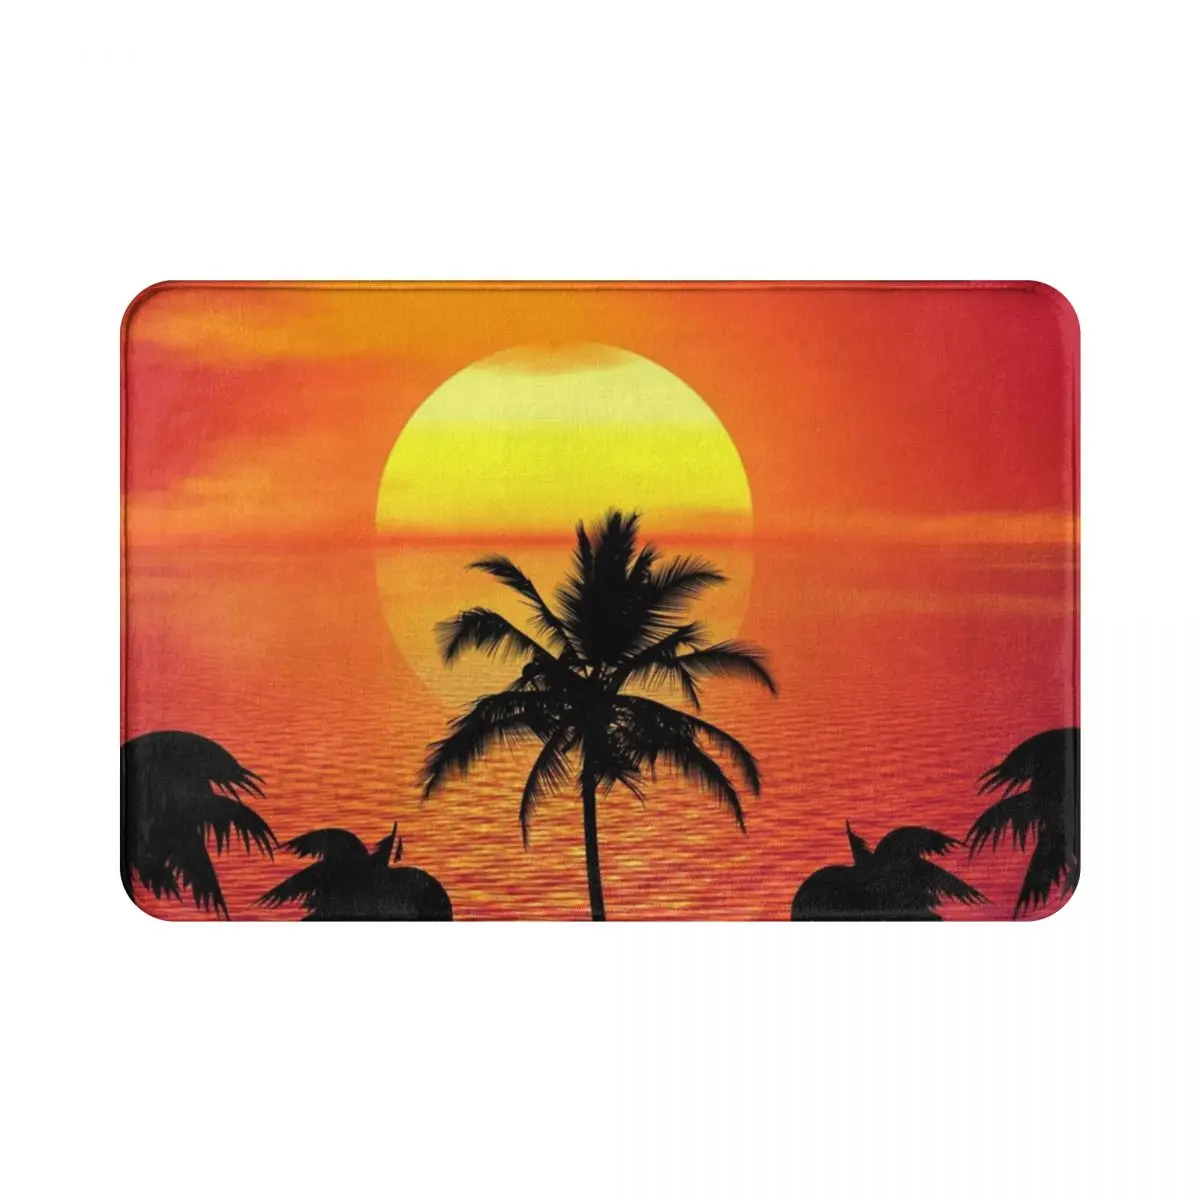 

Sunset Today Polyester Doormat Rug carpet Mat Footpad Non-slip Washable Absorbent Mat Entrance Kitchen Bedroom balcony toilet